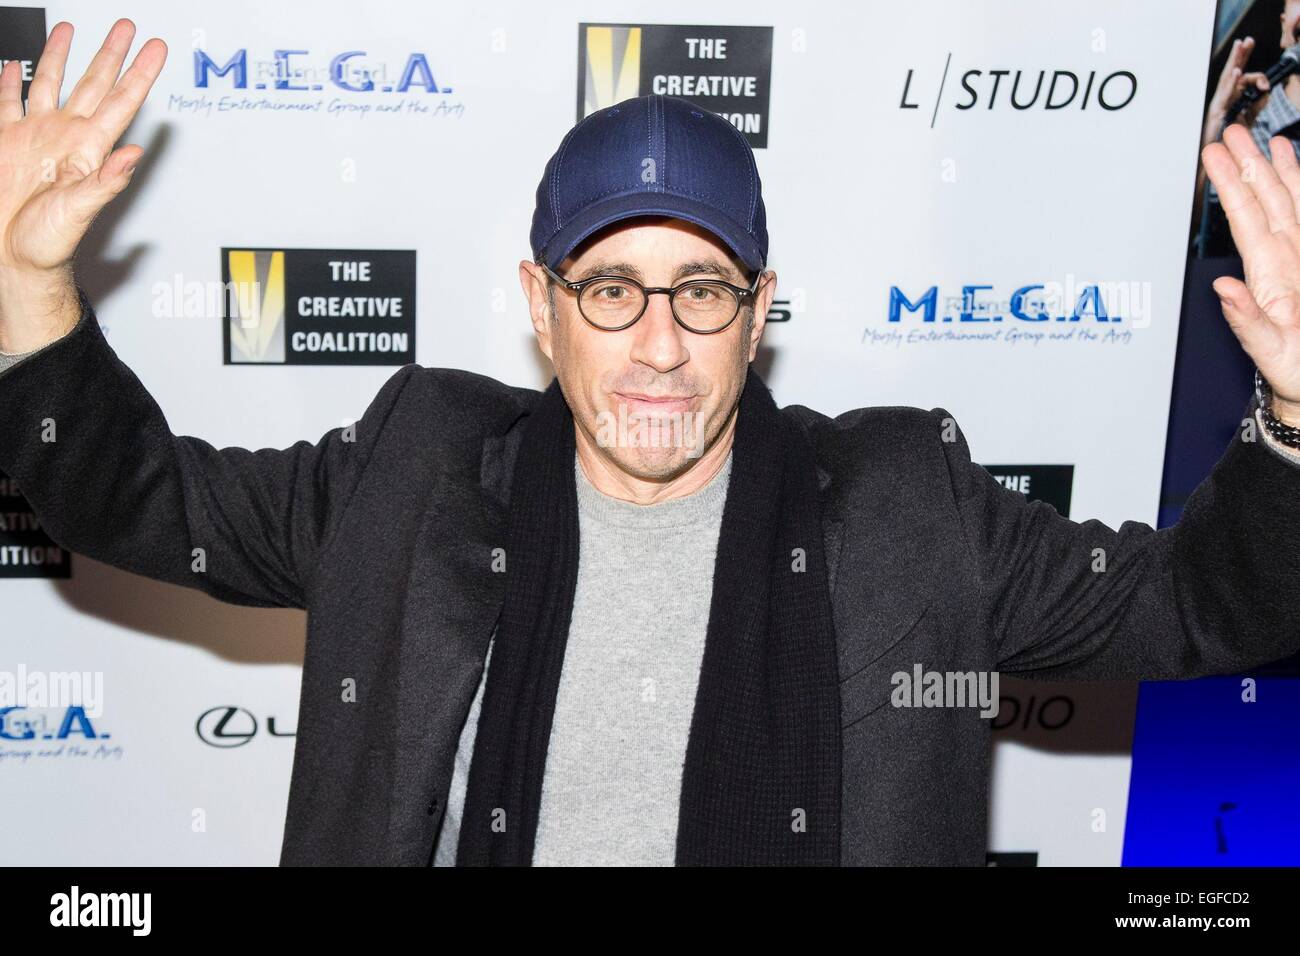 New York, NY, USA. 23rd Feb, 2015. Jerry Seinfeld at arrivals for The Creative Coalition Hosts COP SHOW Premiere, Carolines on Broadway, New York, NY February 23, 2015. Credit:  Patrick Cashin/Everett Collection/Alamy Live News Stock Photo